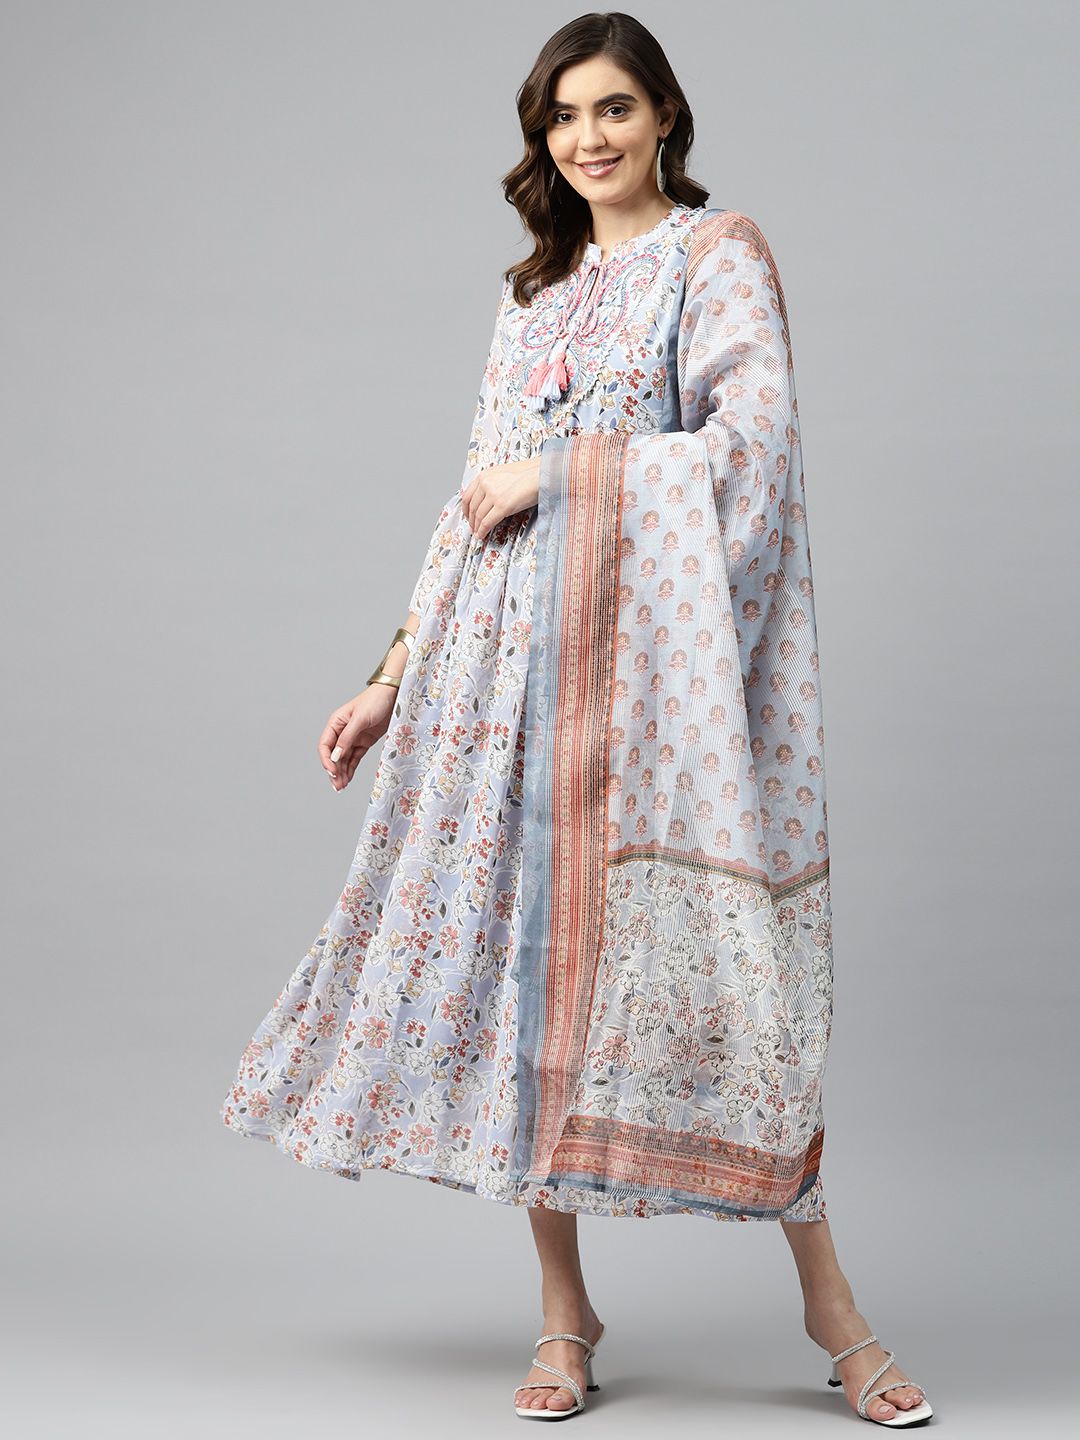 Readiprint Fashions Paisley Print Fit & Flare Midi Ethnic Style Dress with Dupatta Price in India